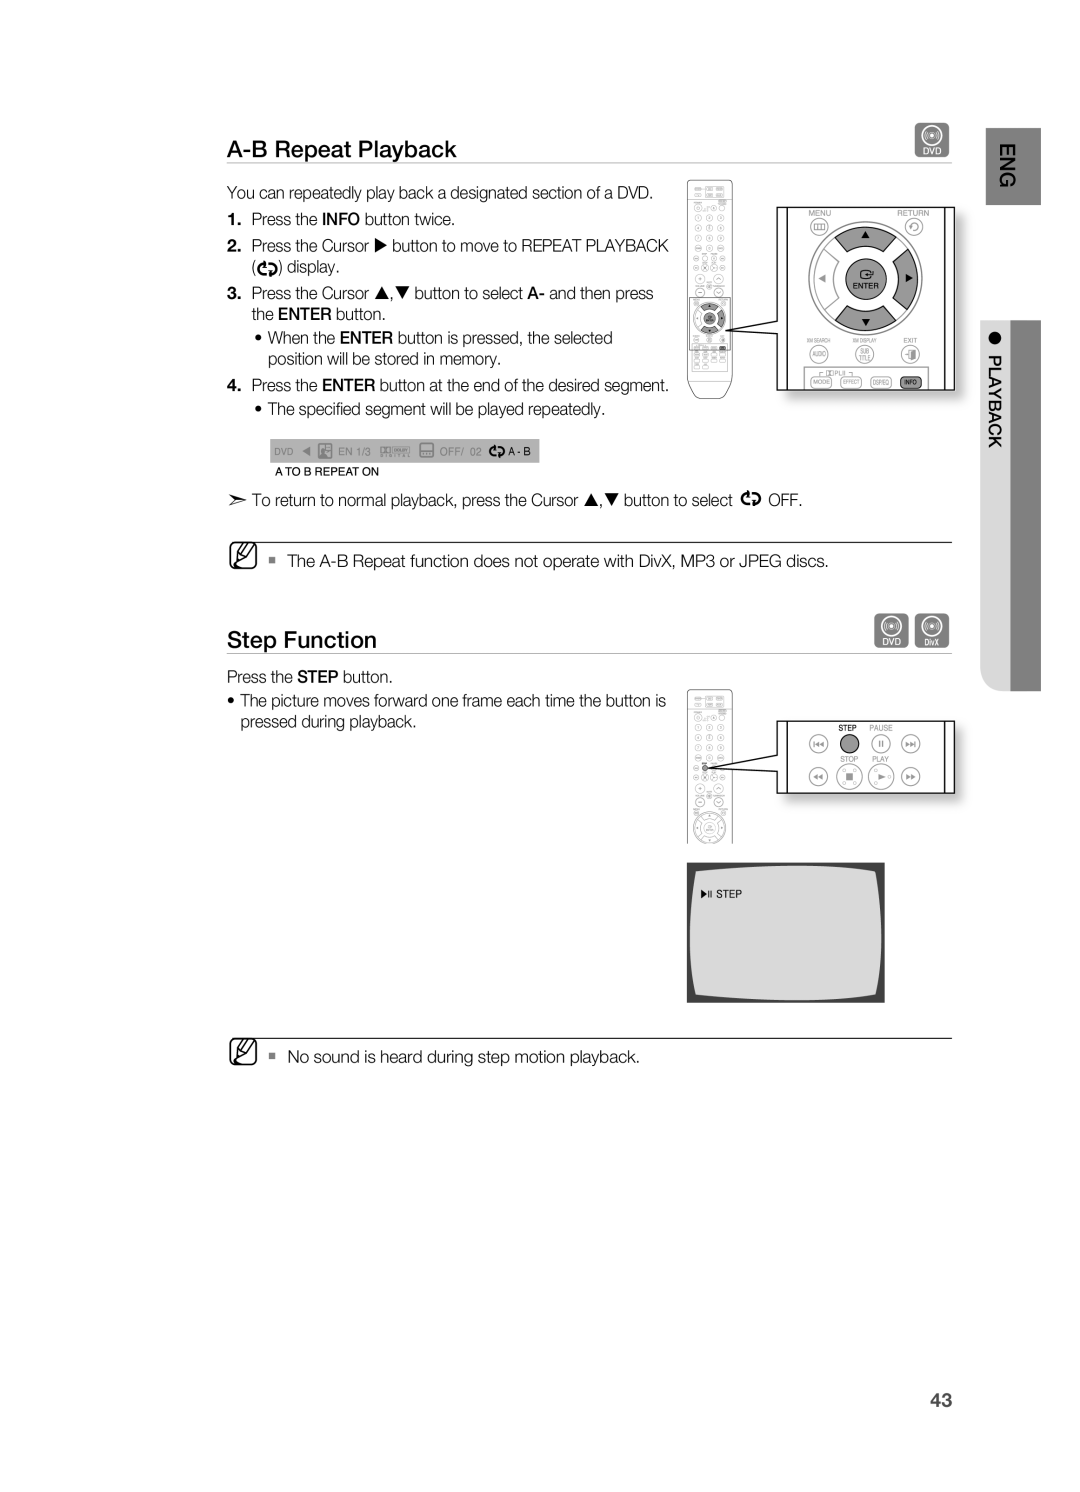 Samsung HT-TZ515 user manual A-Brepeat Playback, Step Function 